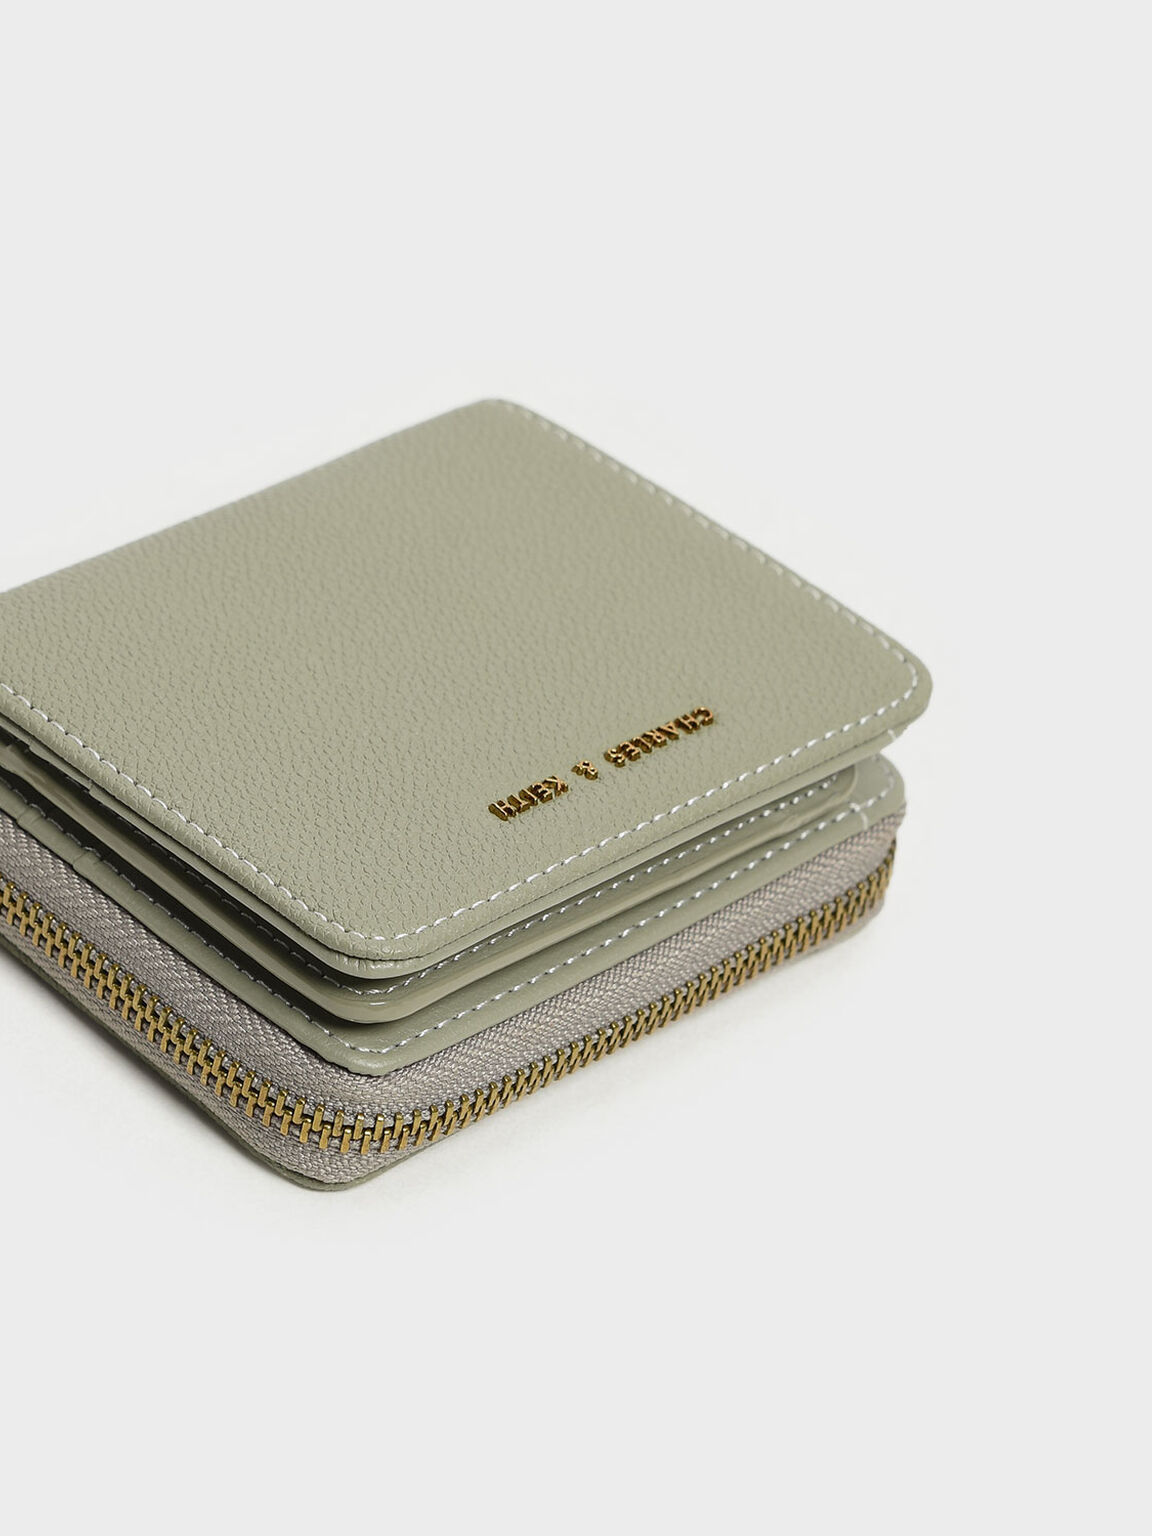 Finding the Perfect Wallets For Women: Style and Function Combined